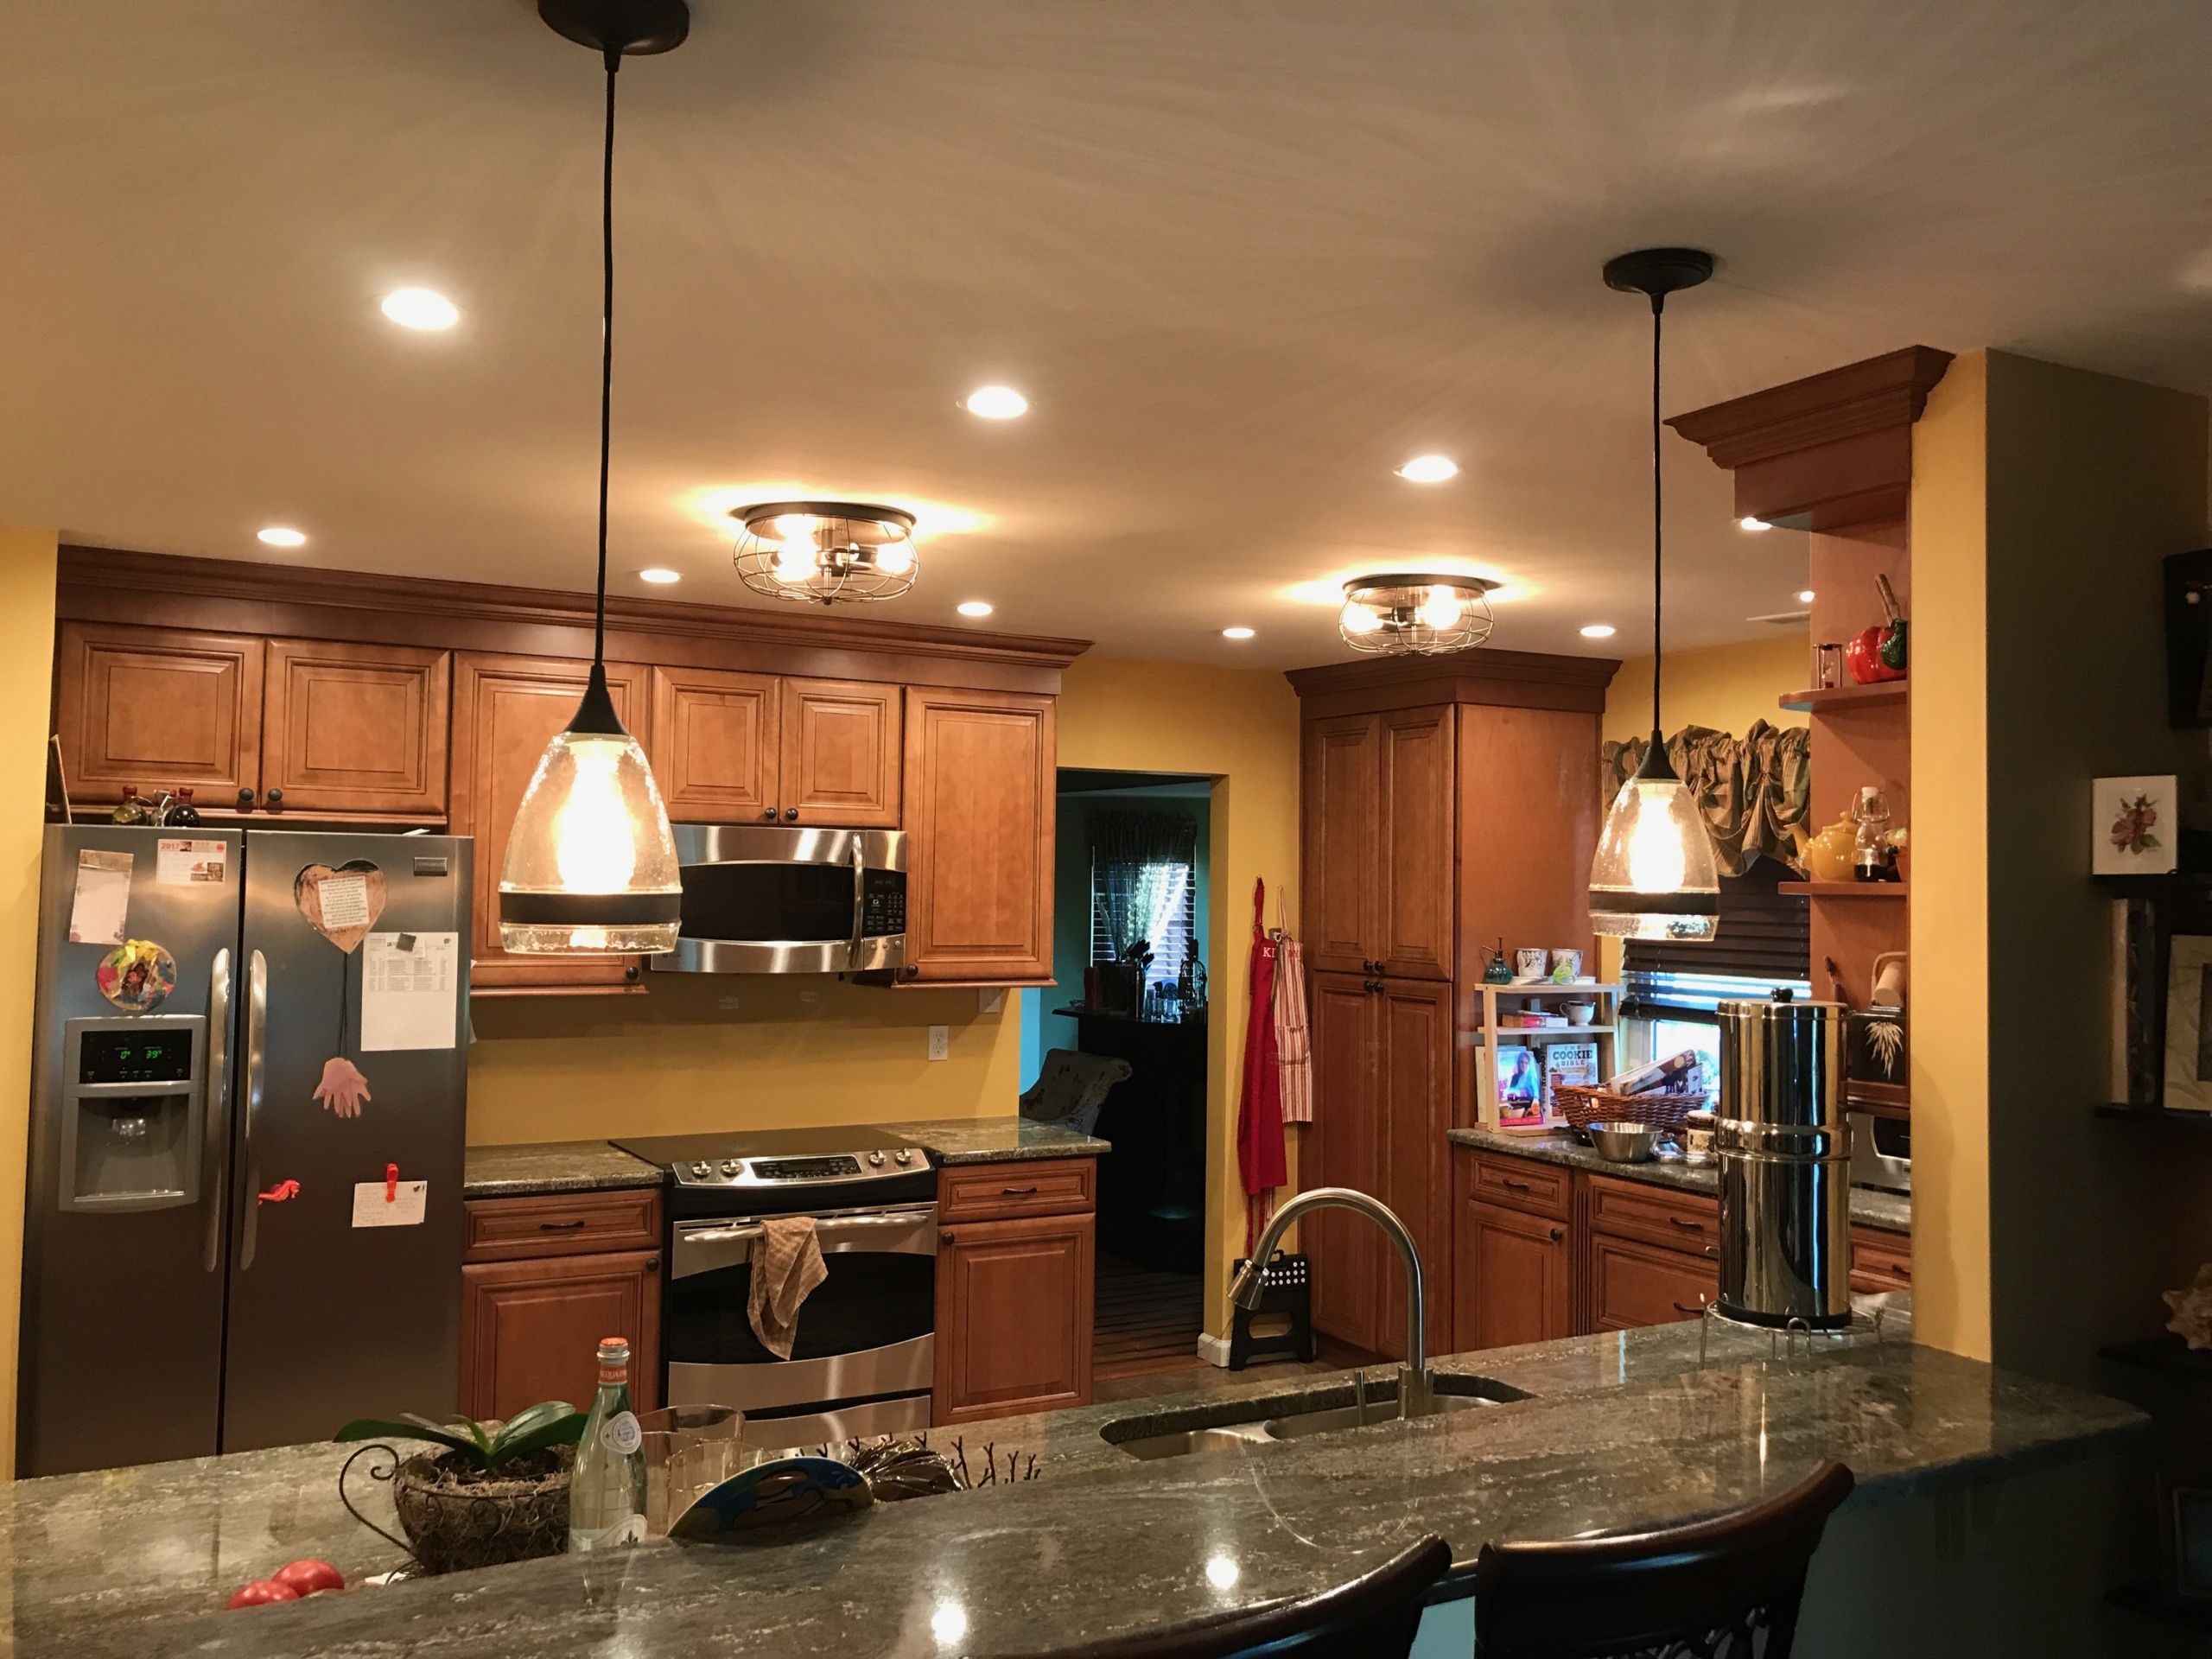 Lighting Fixtures For Kitchen
 Kitchen Lighting Upgrades To Consider For Your Kitchen Remodel